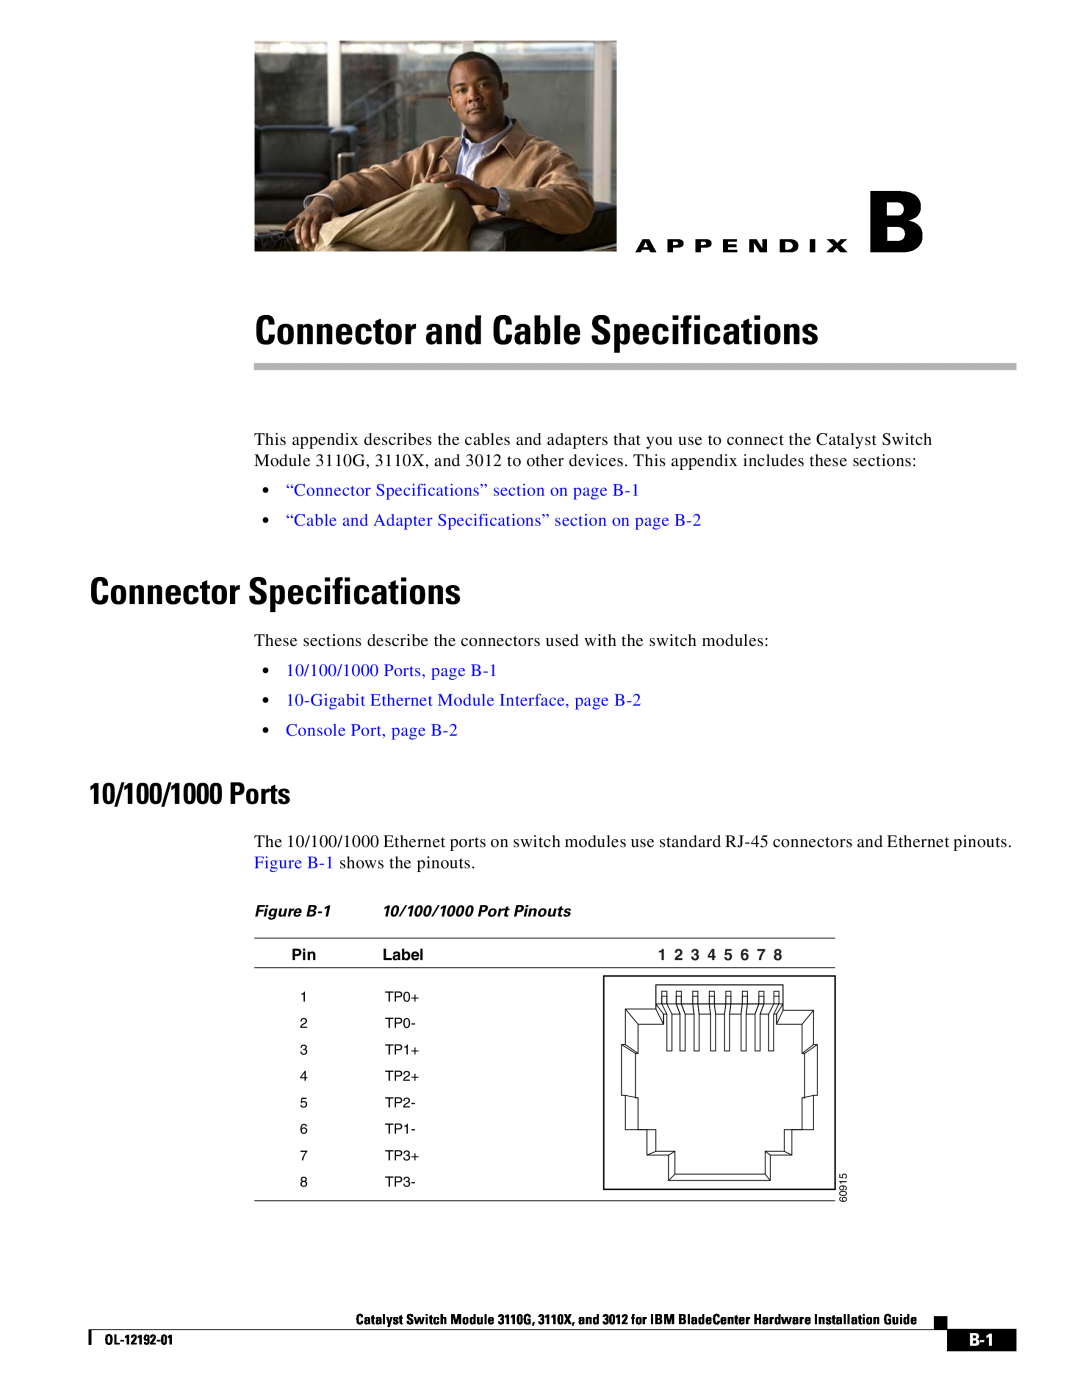 Cisco Systems 3110X Connector and Cable Specifications, Connector Specifications, 10/100/1000 Ports, A P P E N D I X B 